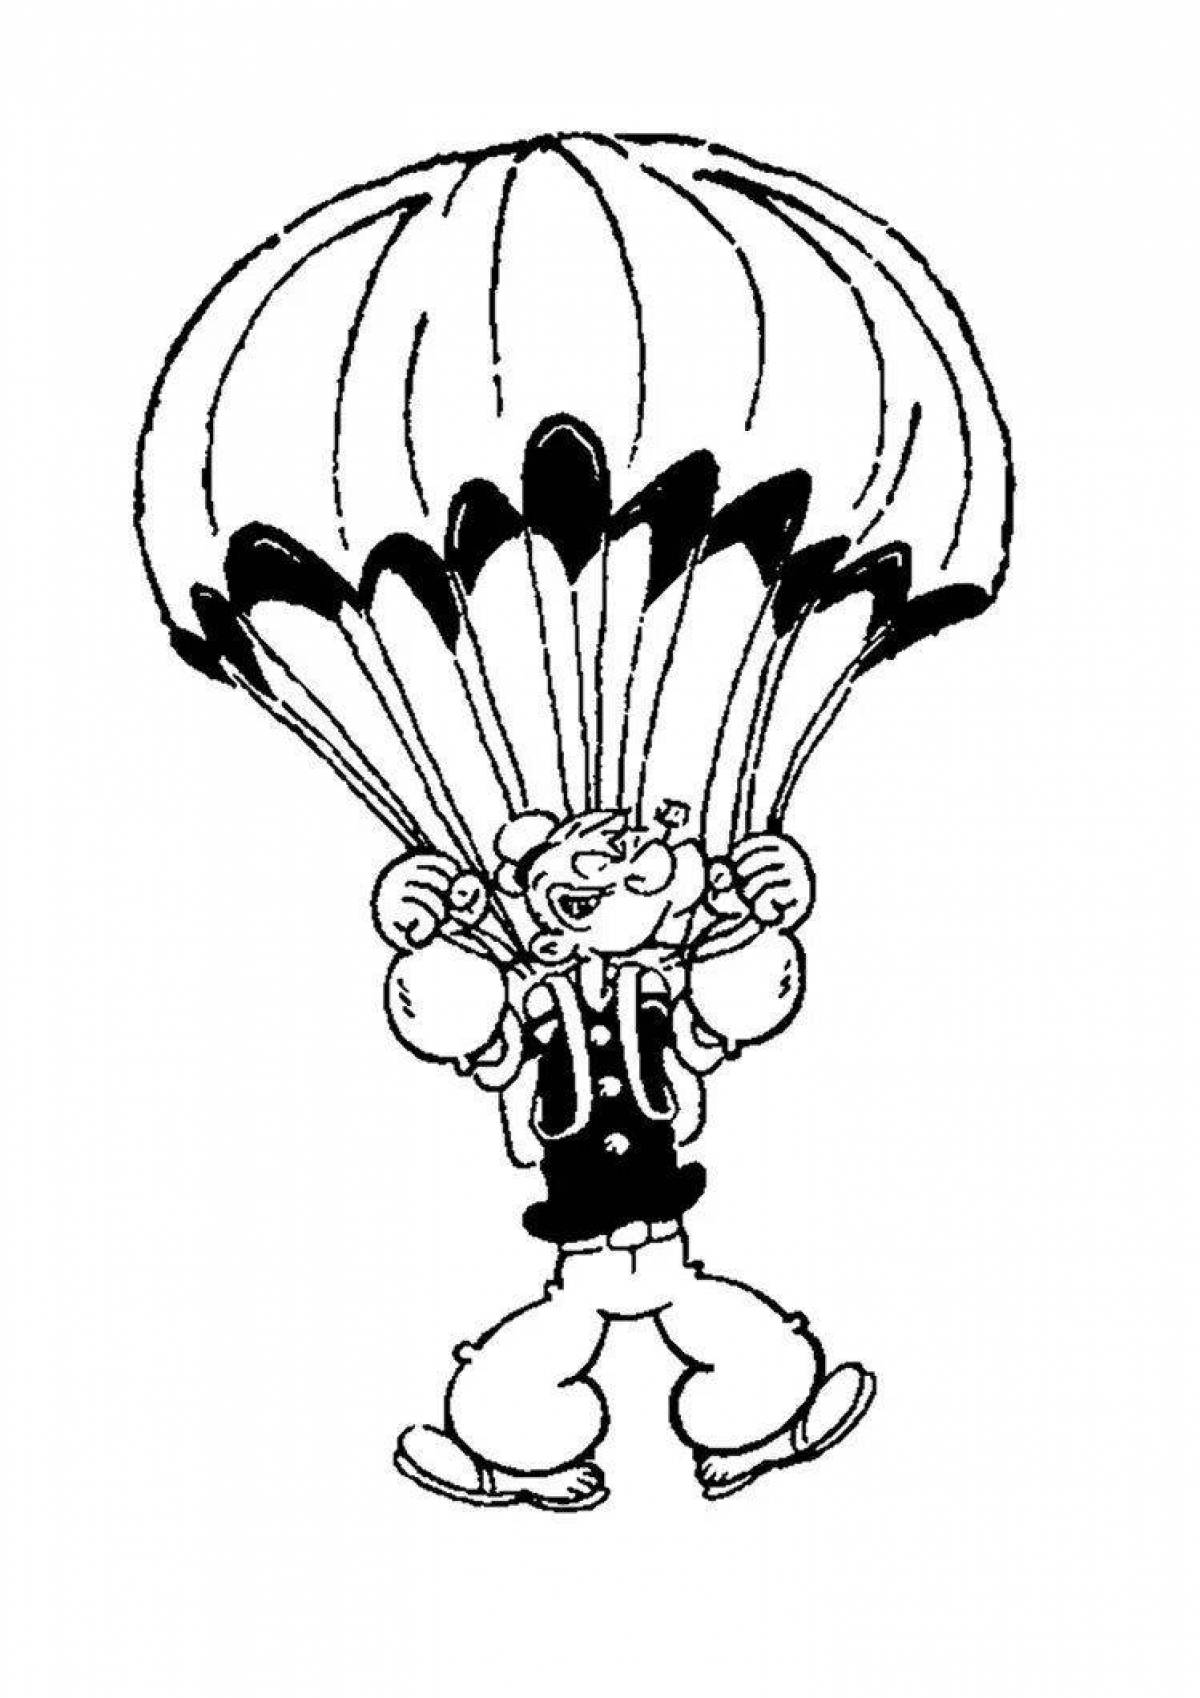 Glorious paratrooper coloring page for kids